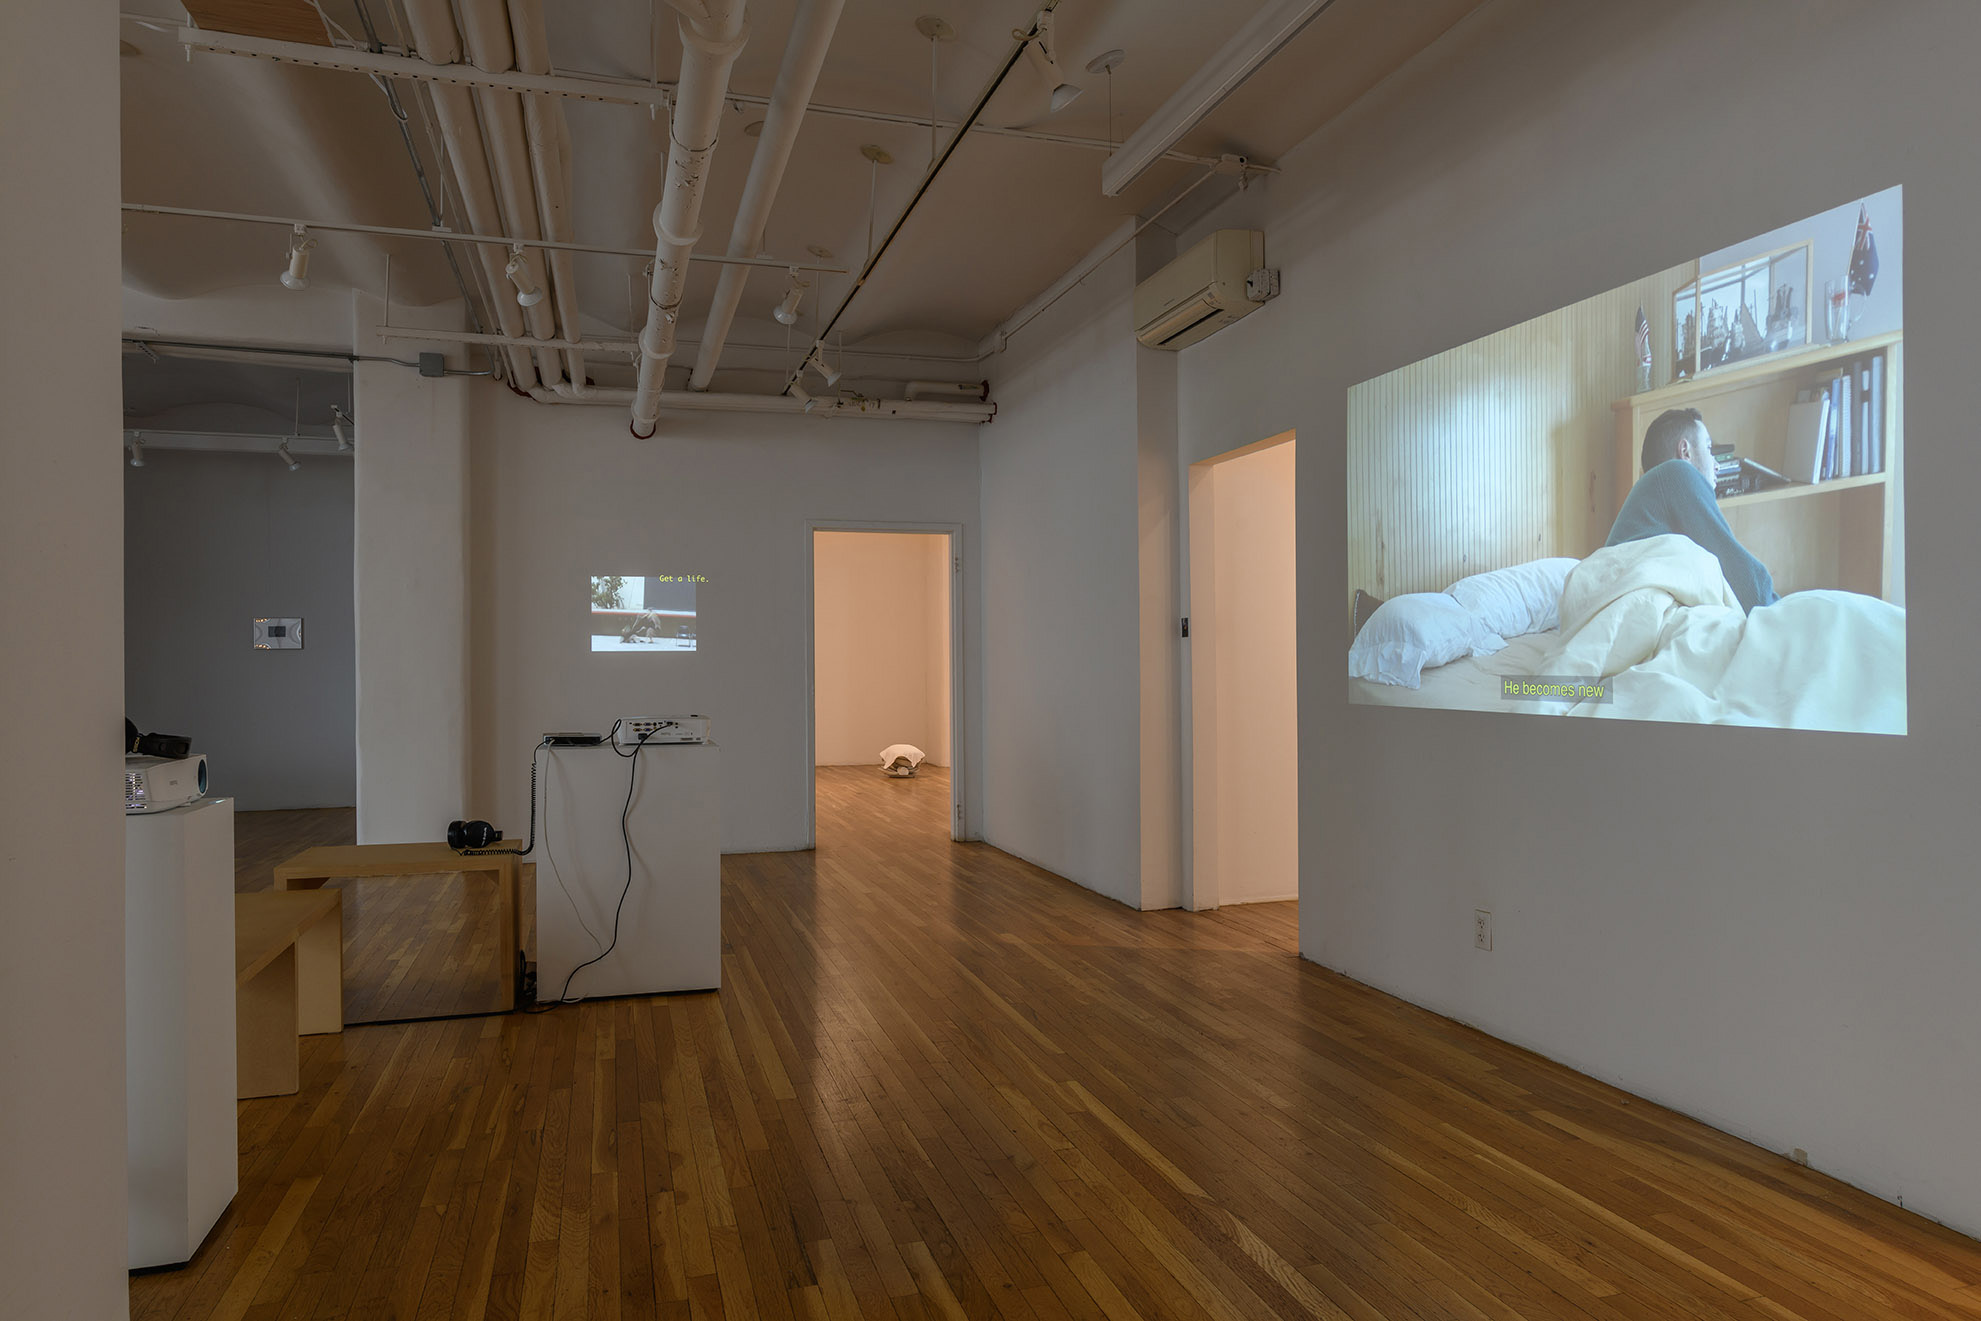 [A view of the main gallery showing in greater detail one of the color video projections of a person in bed. Receding in space are two illuminated open doorways, another color projection nearby, and two white plinths supporting projects on either side of two benches.]